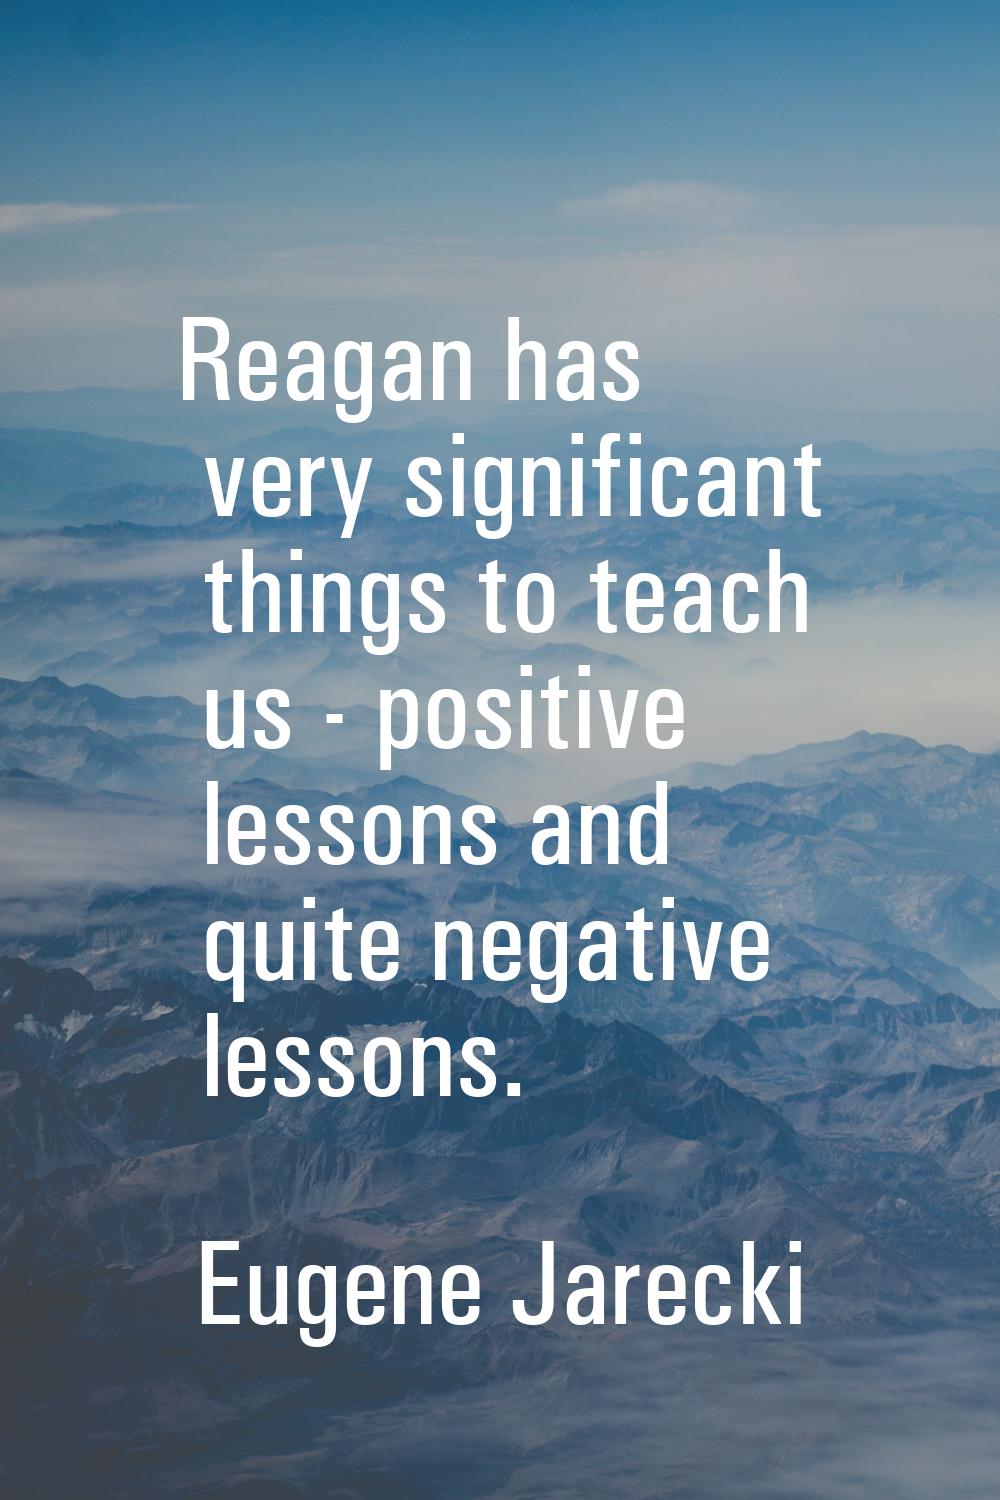 Reagan has very significant things to teach us - positive lessons and quite negative lessons.